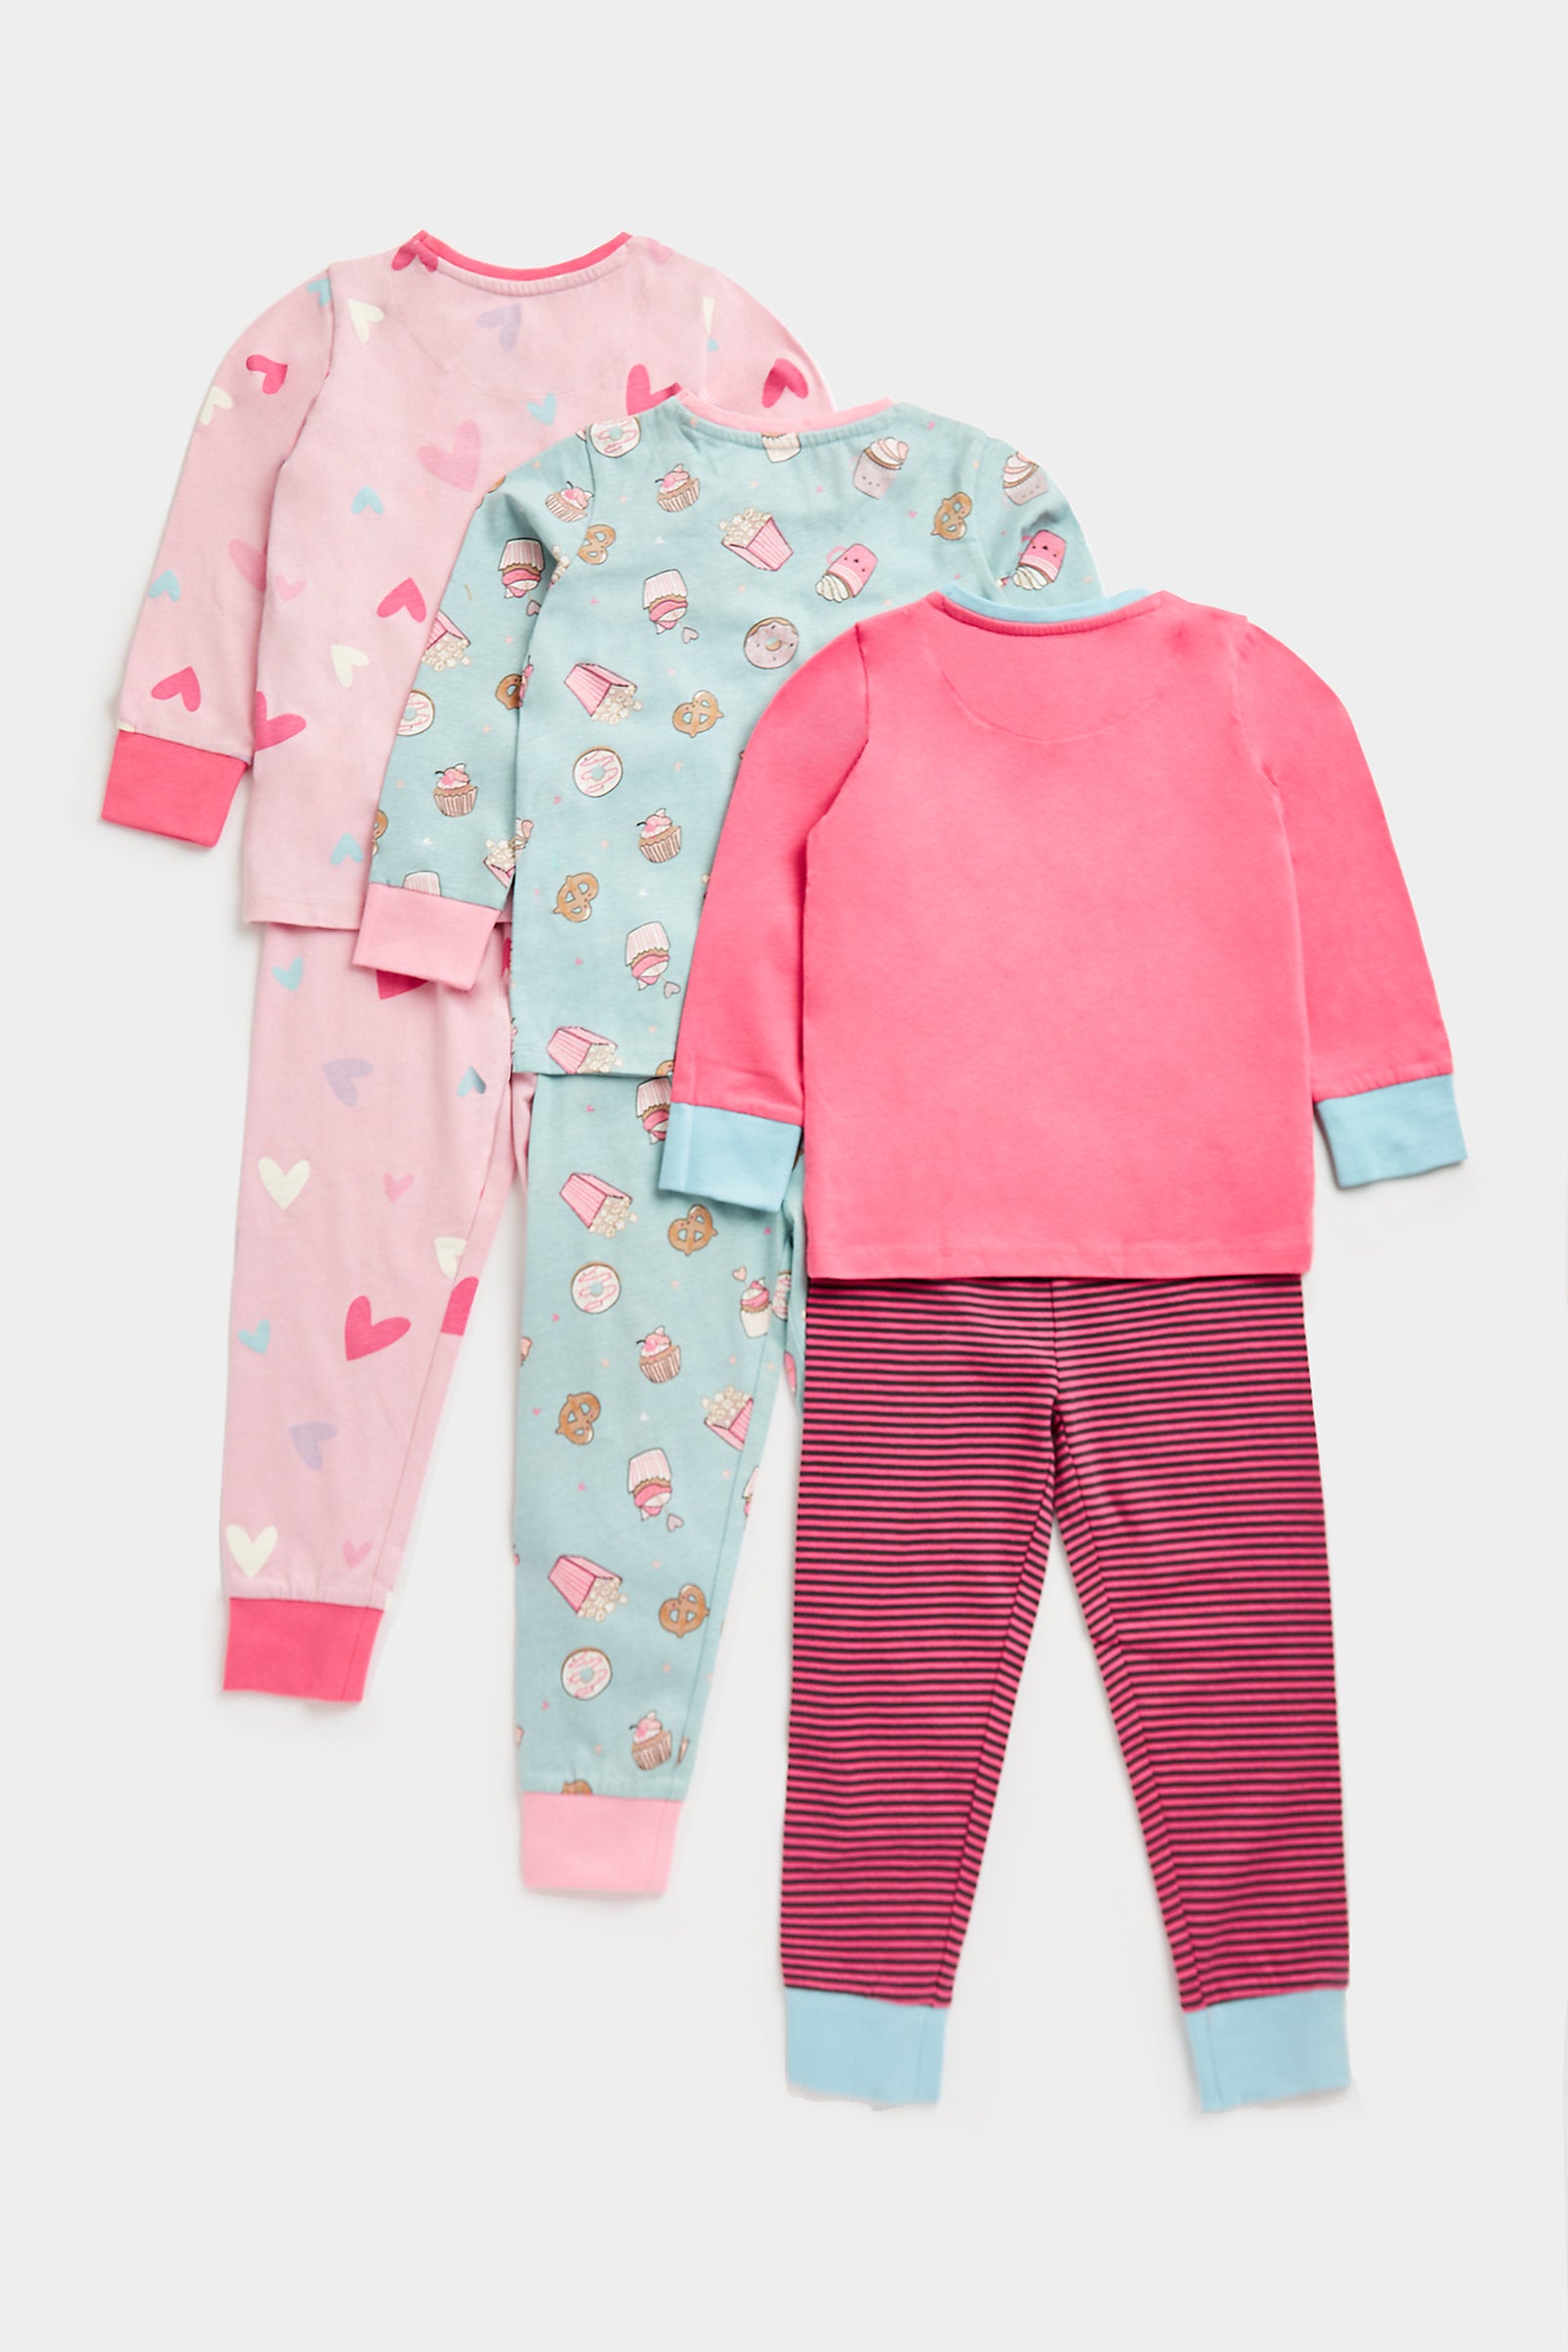 Mothercare Snack Squad Pyjamas - 3 Pack